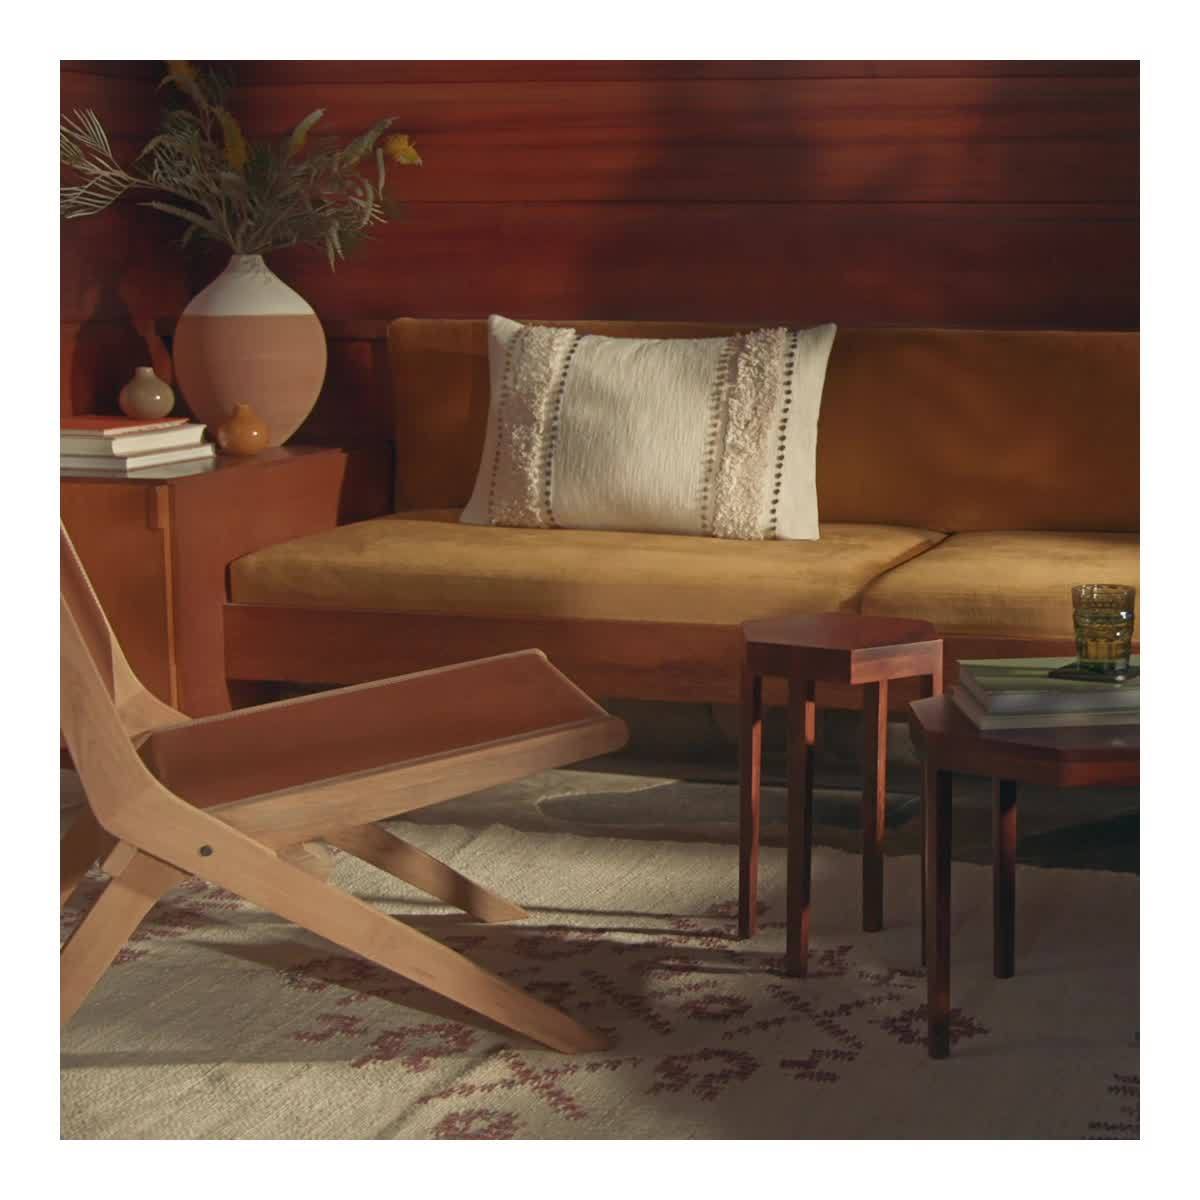 SS20 Campaign | To create a #home where time slows to its most leisurely pace, and a warm sense of well-being permeates. Where the light ambles in from every door and window, inviting a sense of endless #summer, and #golden hours that last forever. This is #modernism, in the #Californian tradition. Find out more at #zarahome.com